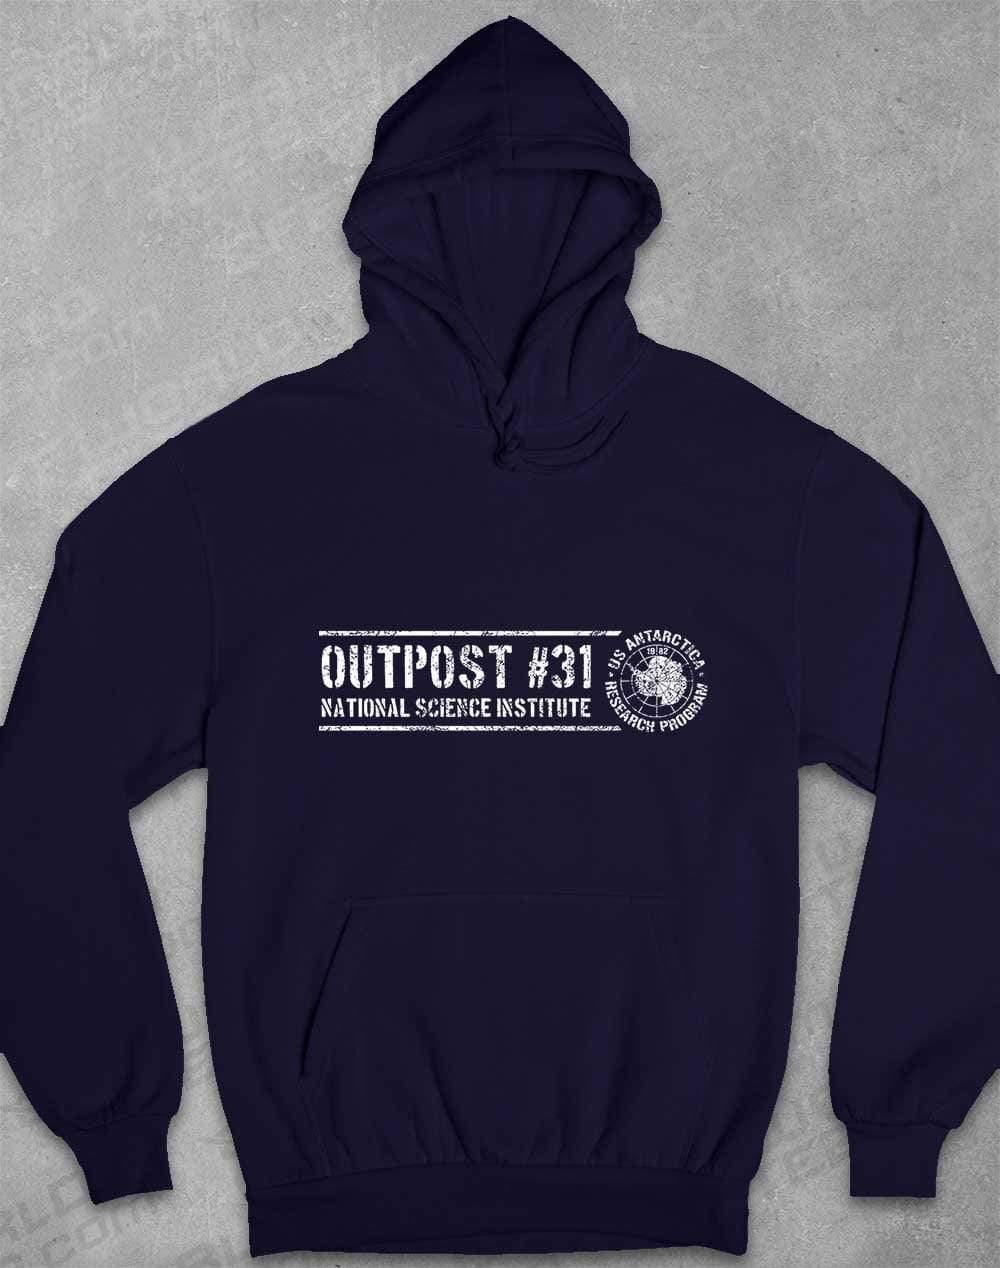 Outpost 31 Antarctica Hoodie XS / Oxford Navy  - Off World Tees